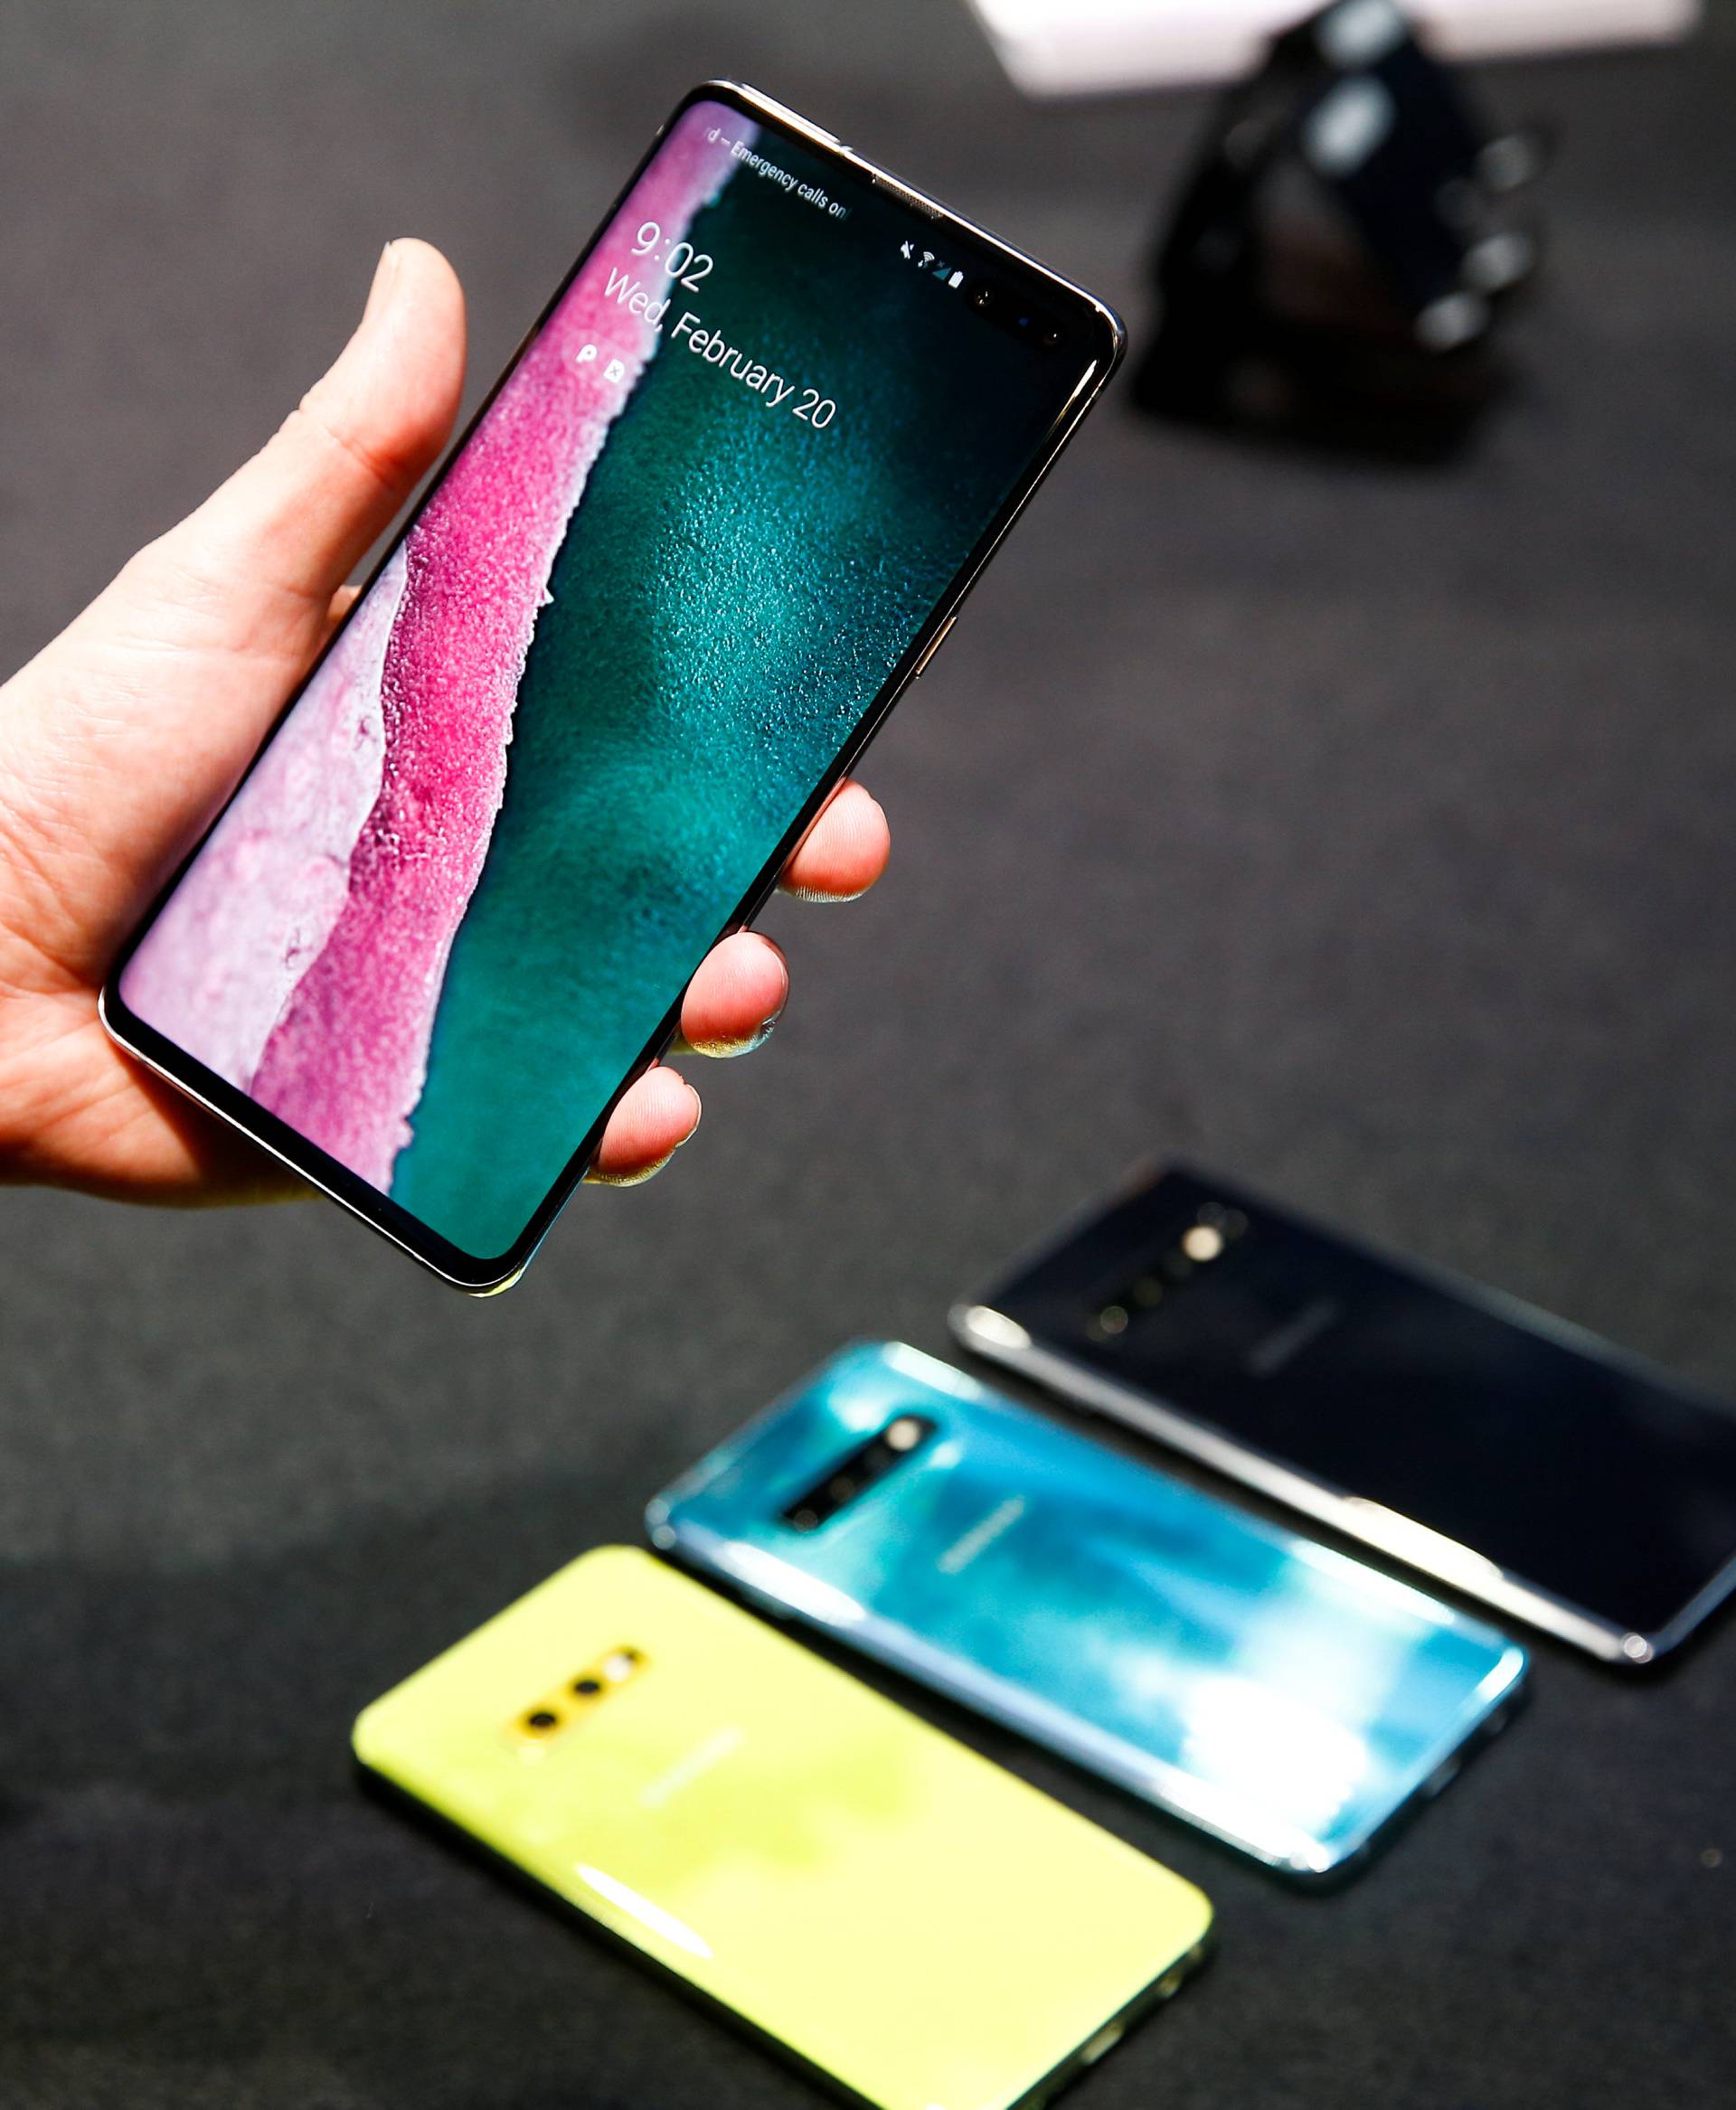 A journalist holds the new Samsung Galaxy S10 smartphone at a press event in London